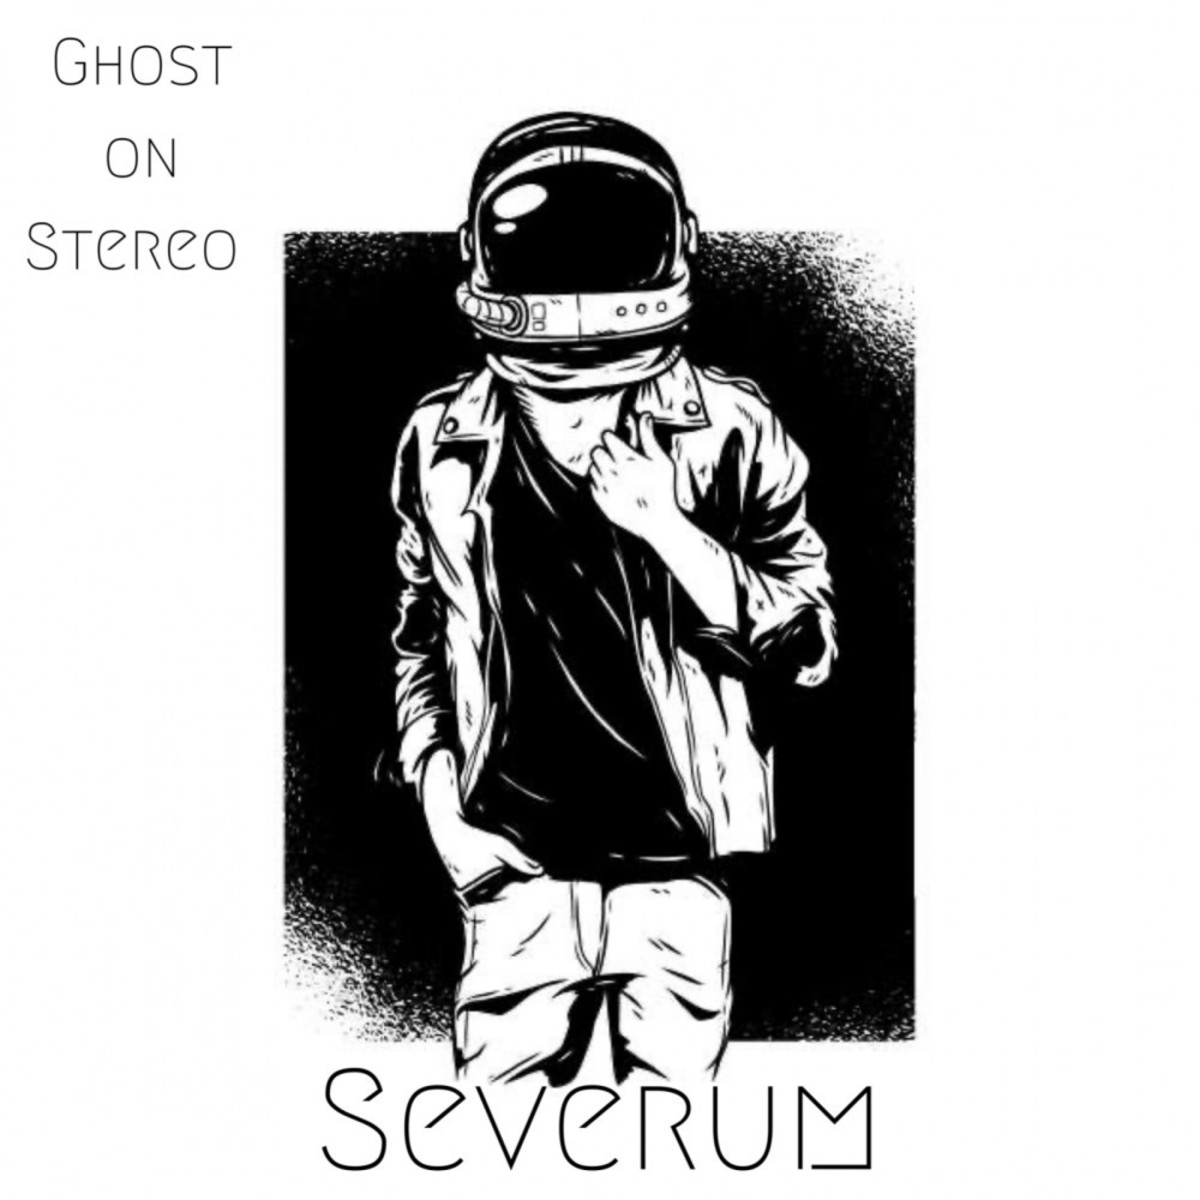 Synth Album Review: "Ghost On Stereo" by Severum